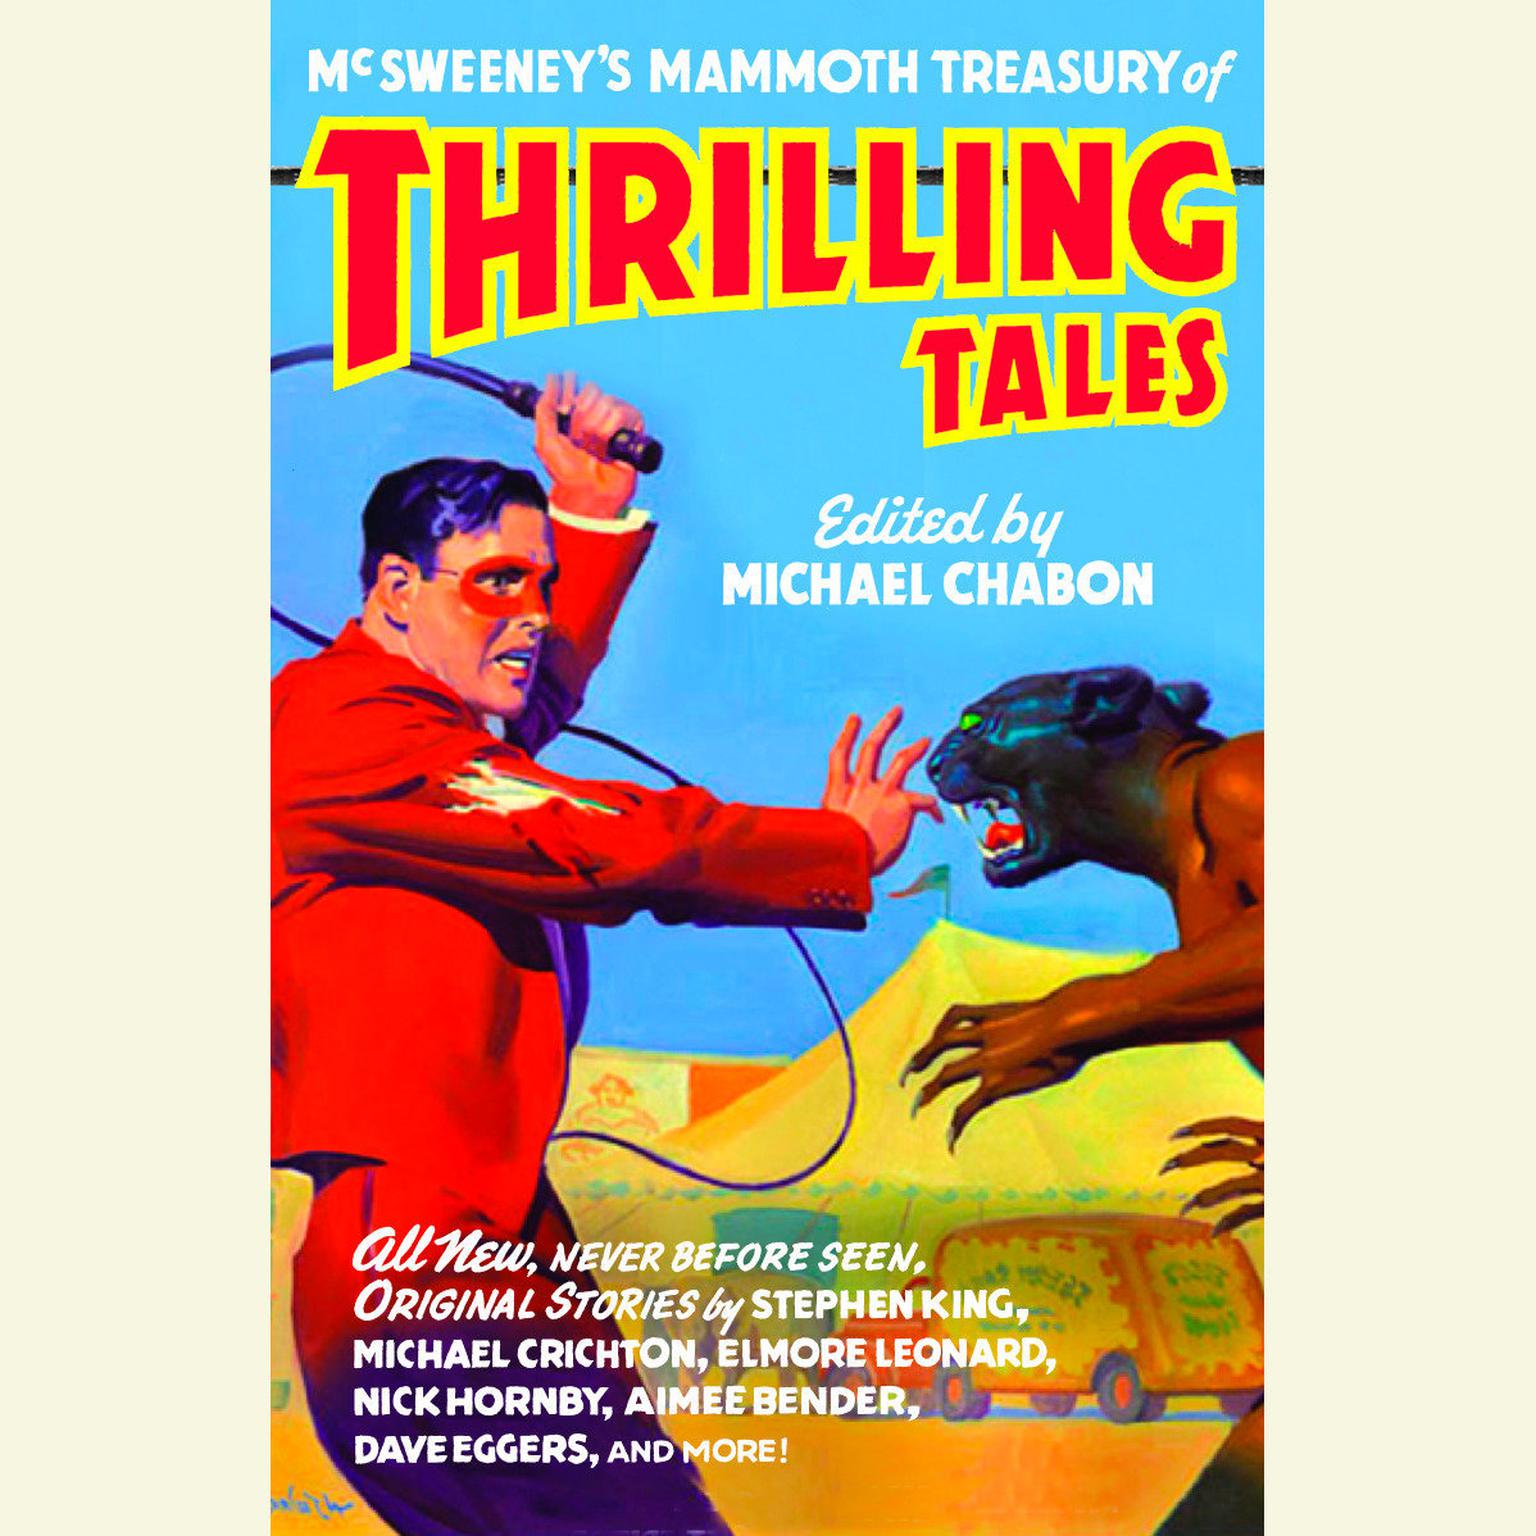 McSweeneys Mammoth Treasury of Thrilling Tales (Abridged) Audiobook, by Michael Chabon